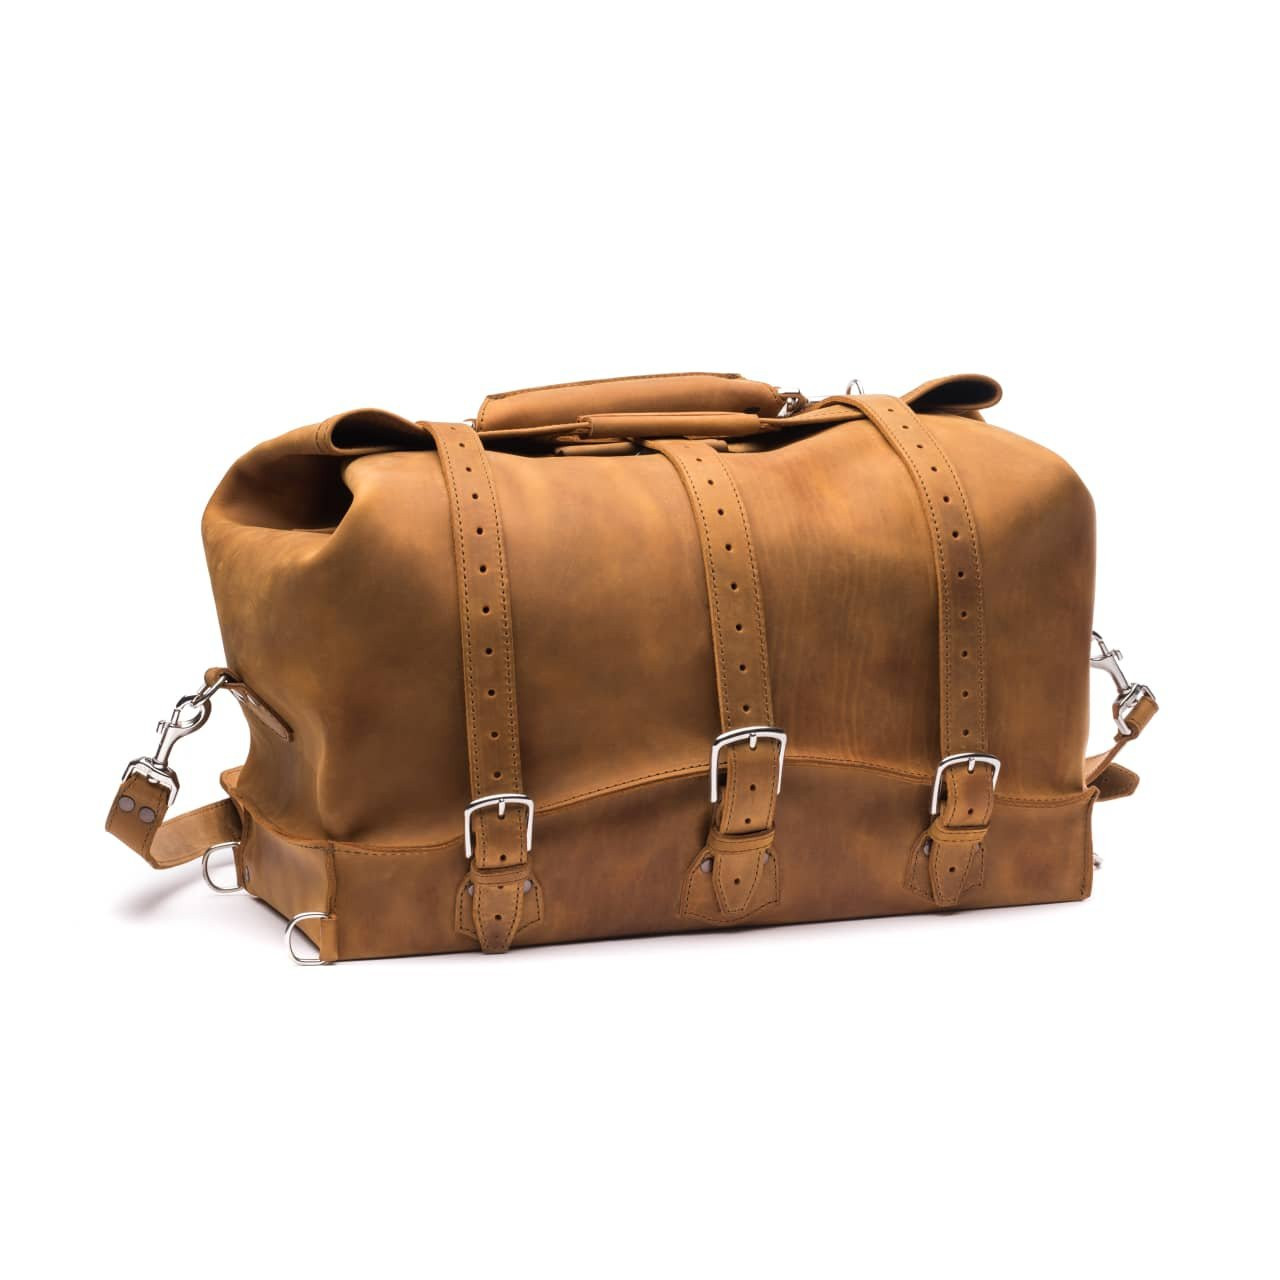 Leather Duffle Bag, Overnight Carry On Travel Luggage